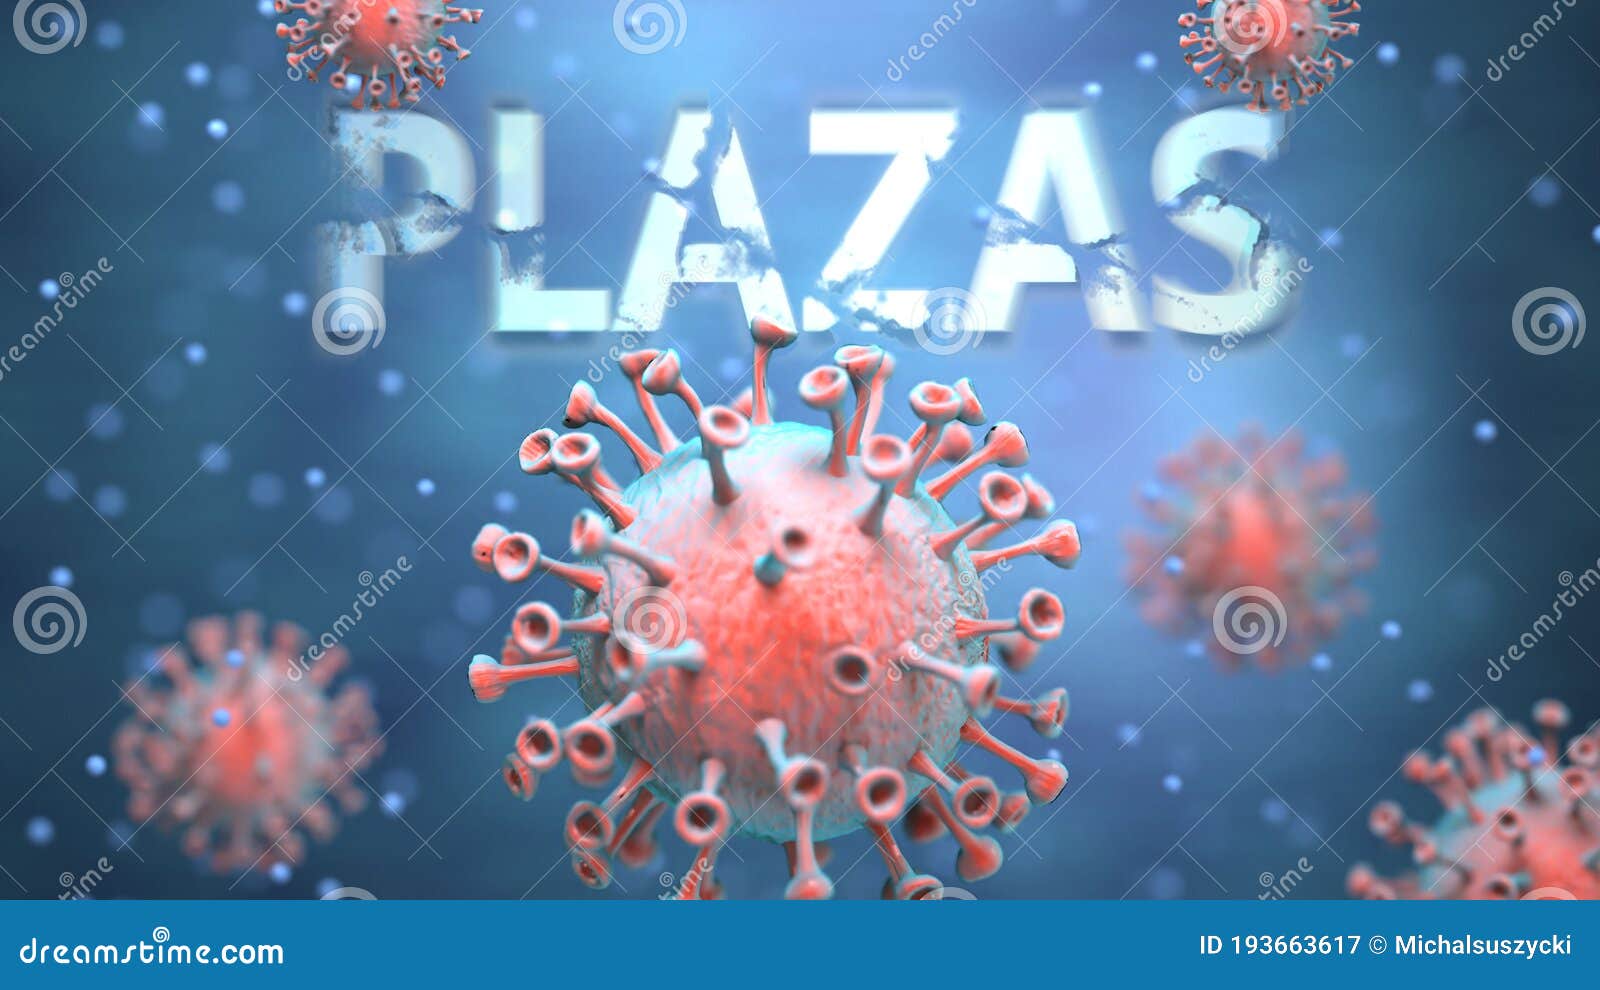 covid and plazas, pictured as red viruses attacking word plazas to ize turmoil, global world problems and the relation